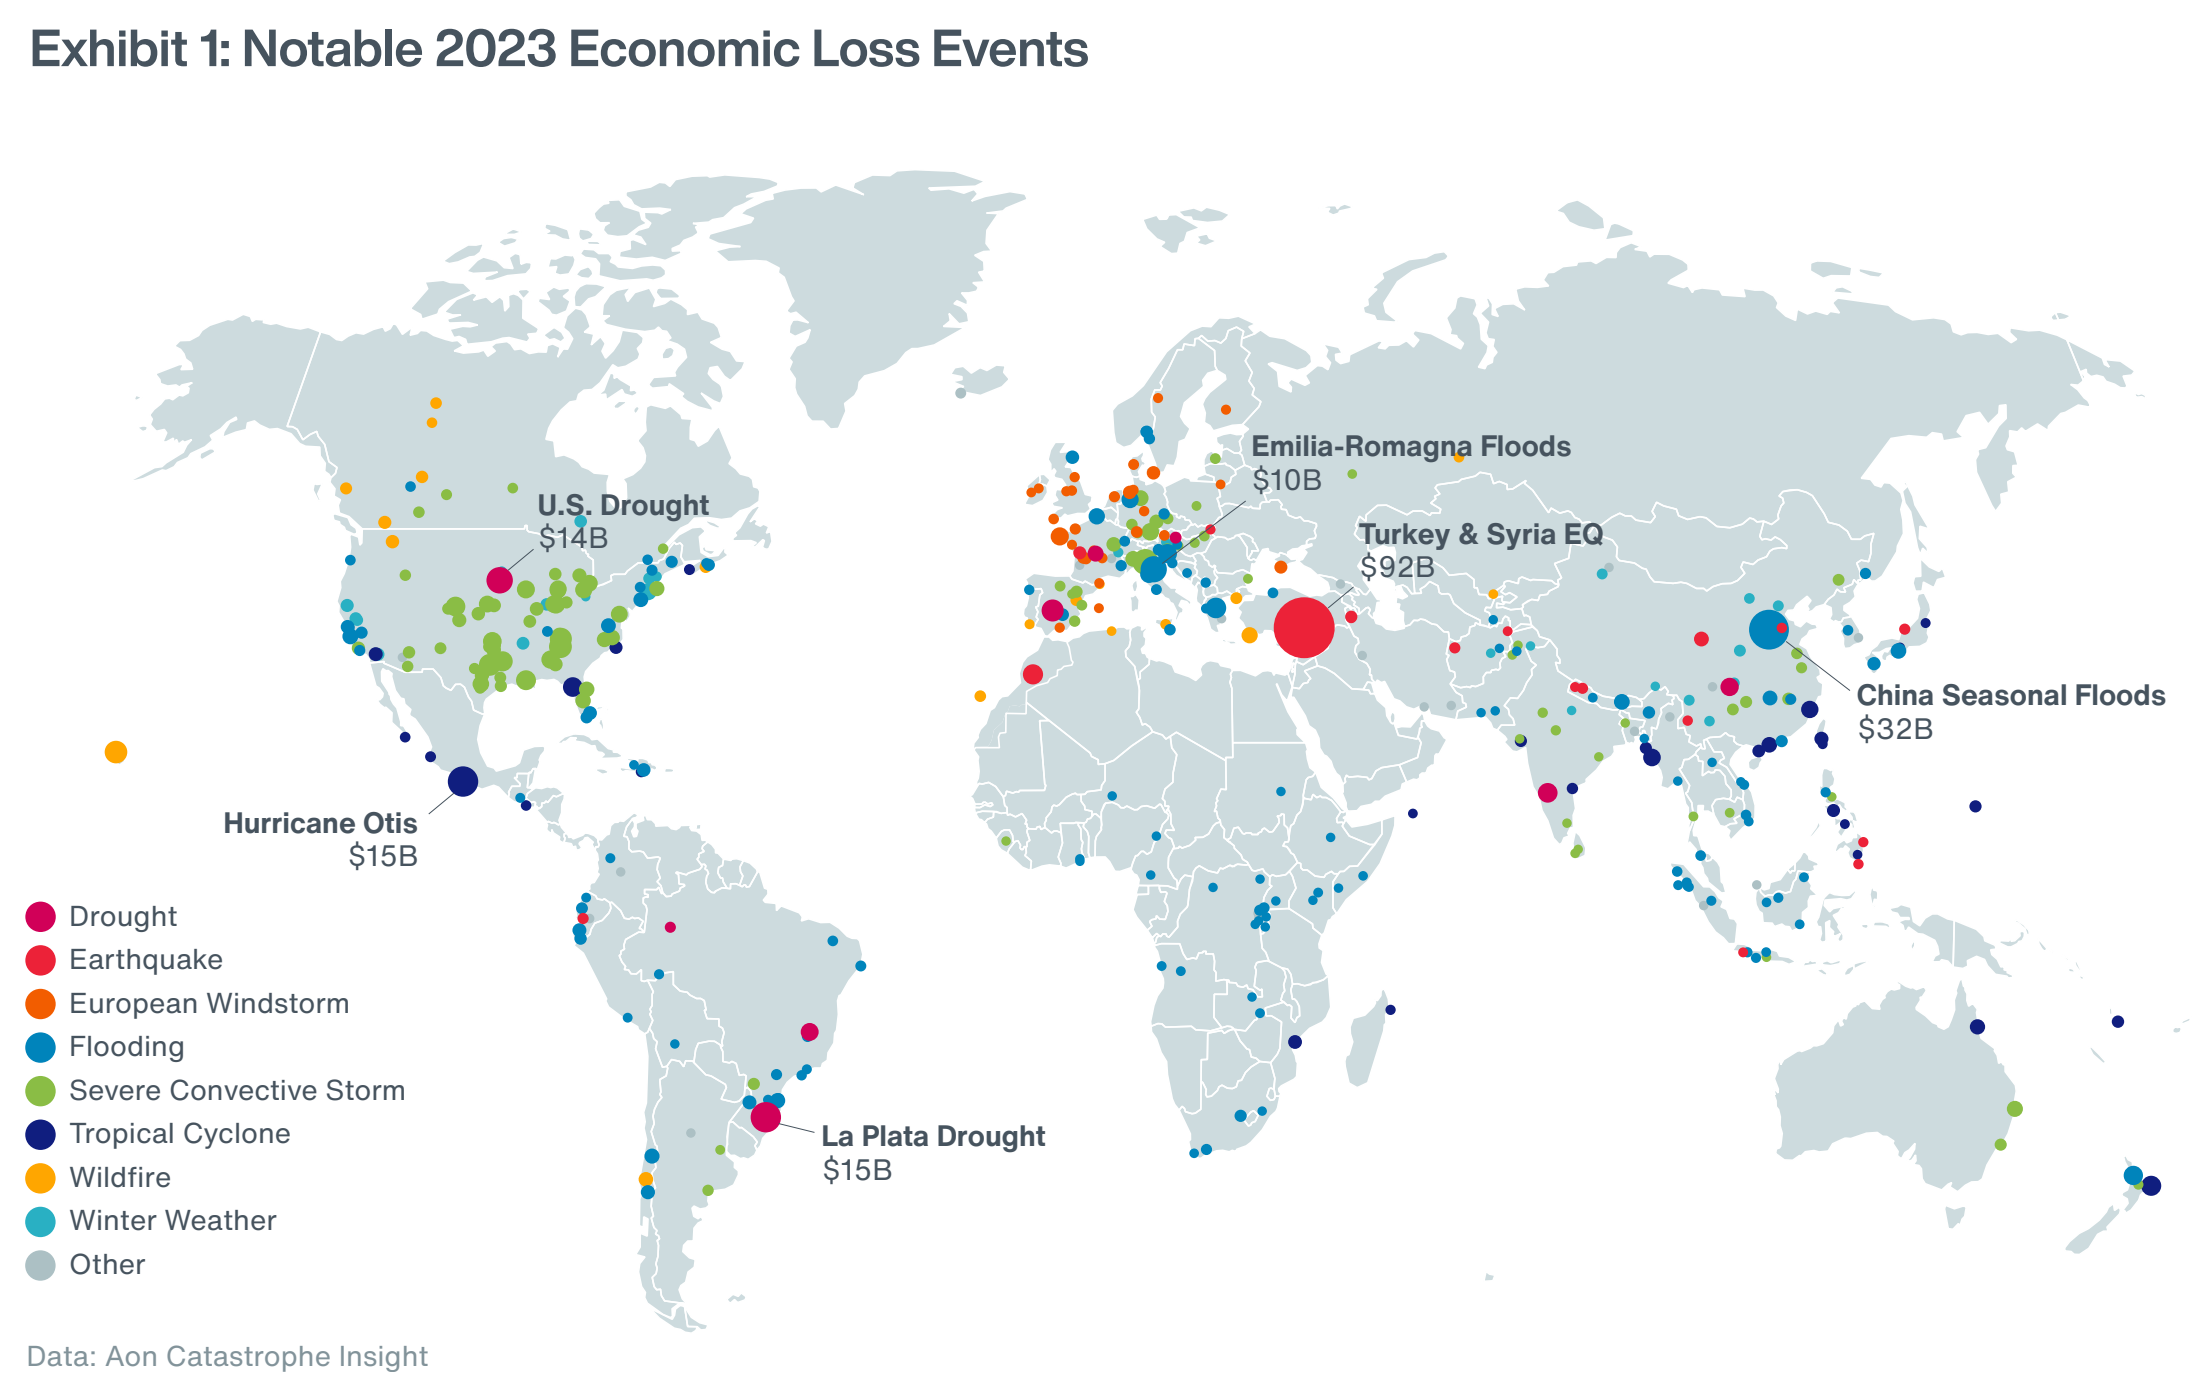 Map showing notable economic loss events due to natural and climate disasters in 2023. Global economic losses in 2023 were higher than the 21st century average. Economic losses from global natural disasters in 2023 are estimated at $380 billion, above long-term and short-term averages, after adjusting historical losses to today’s values using the U.S. Consumer Price Index. All continents recorded remarkable natural disaster events in 2023 and multiple countries faced the most significant disasters in their modern histories. The global map shows event and peril patterns that contributed to the overall economic losses in 2023. The largest loss driver was earthquake, yet this was largely caused by a handful of events, notably the earthquake sequence in Turkey and Syria. Severe convective storms came second, with the largest individual losses concentrated in the United States and Europe. Graphic: Aon